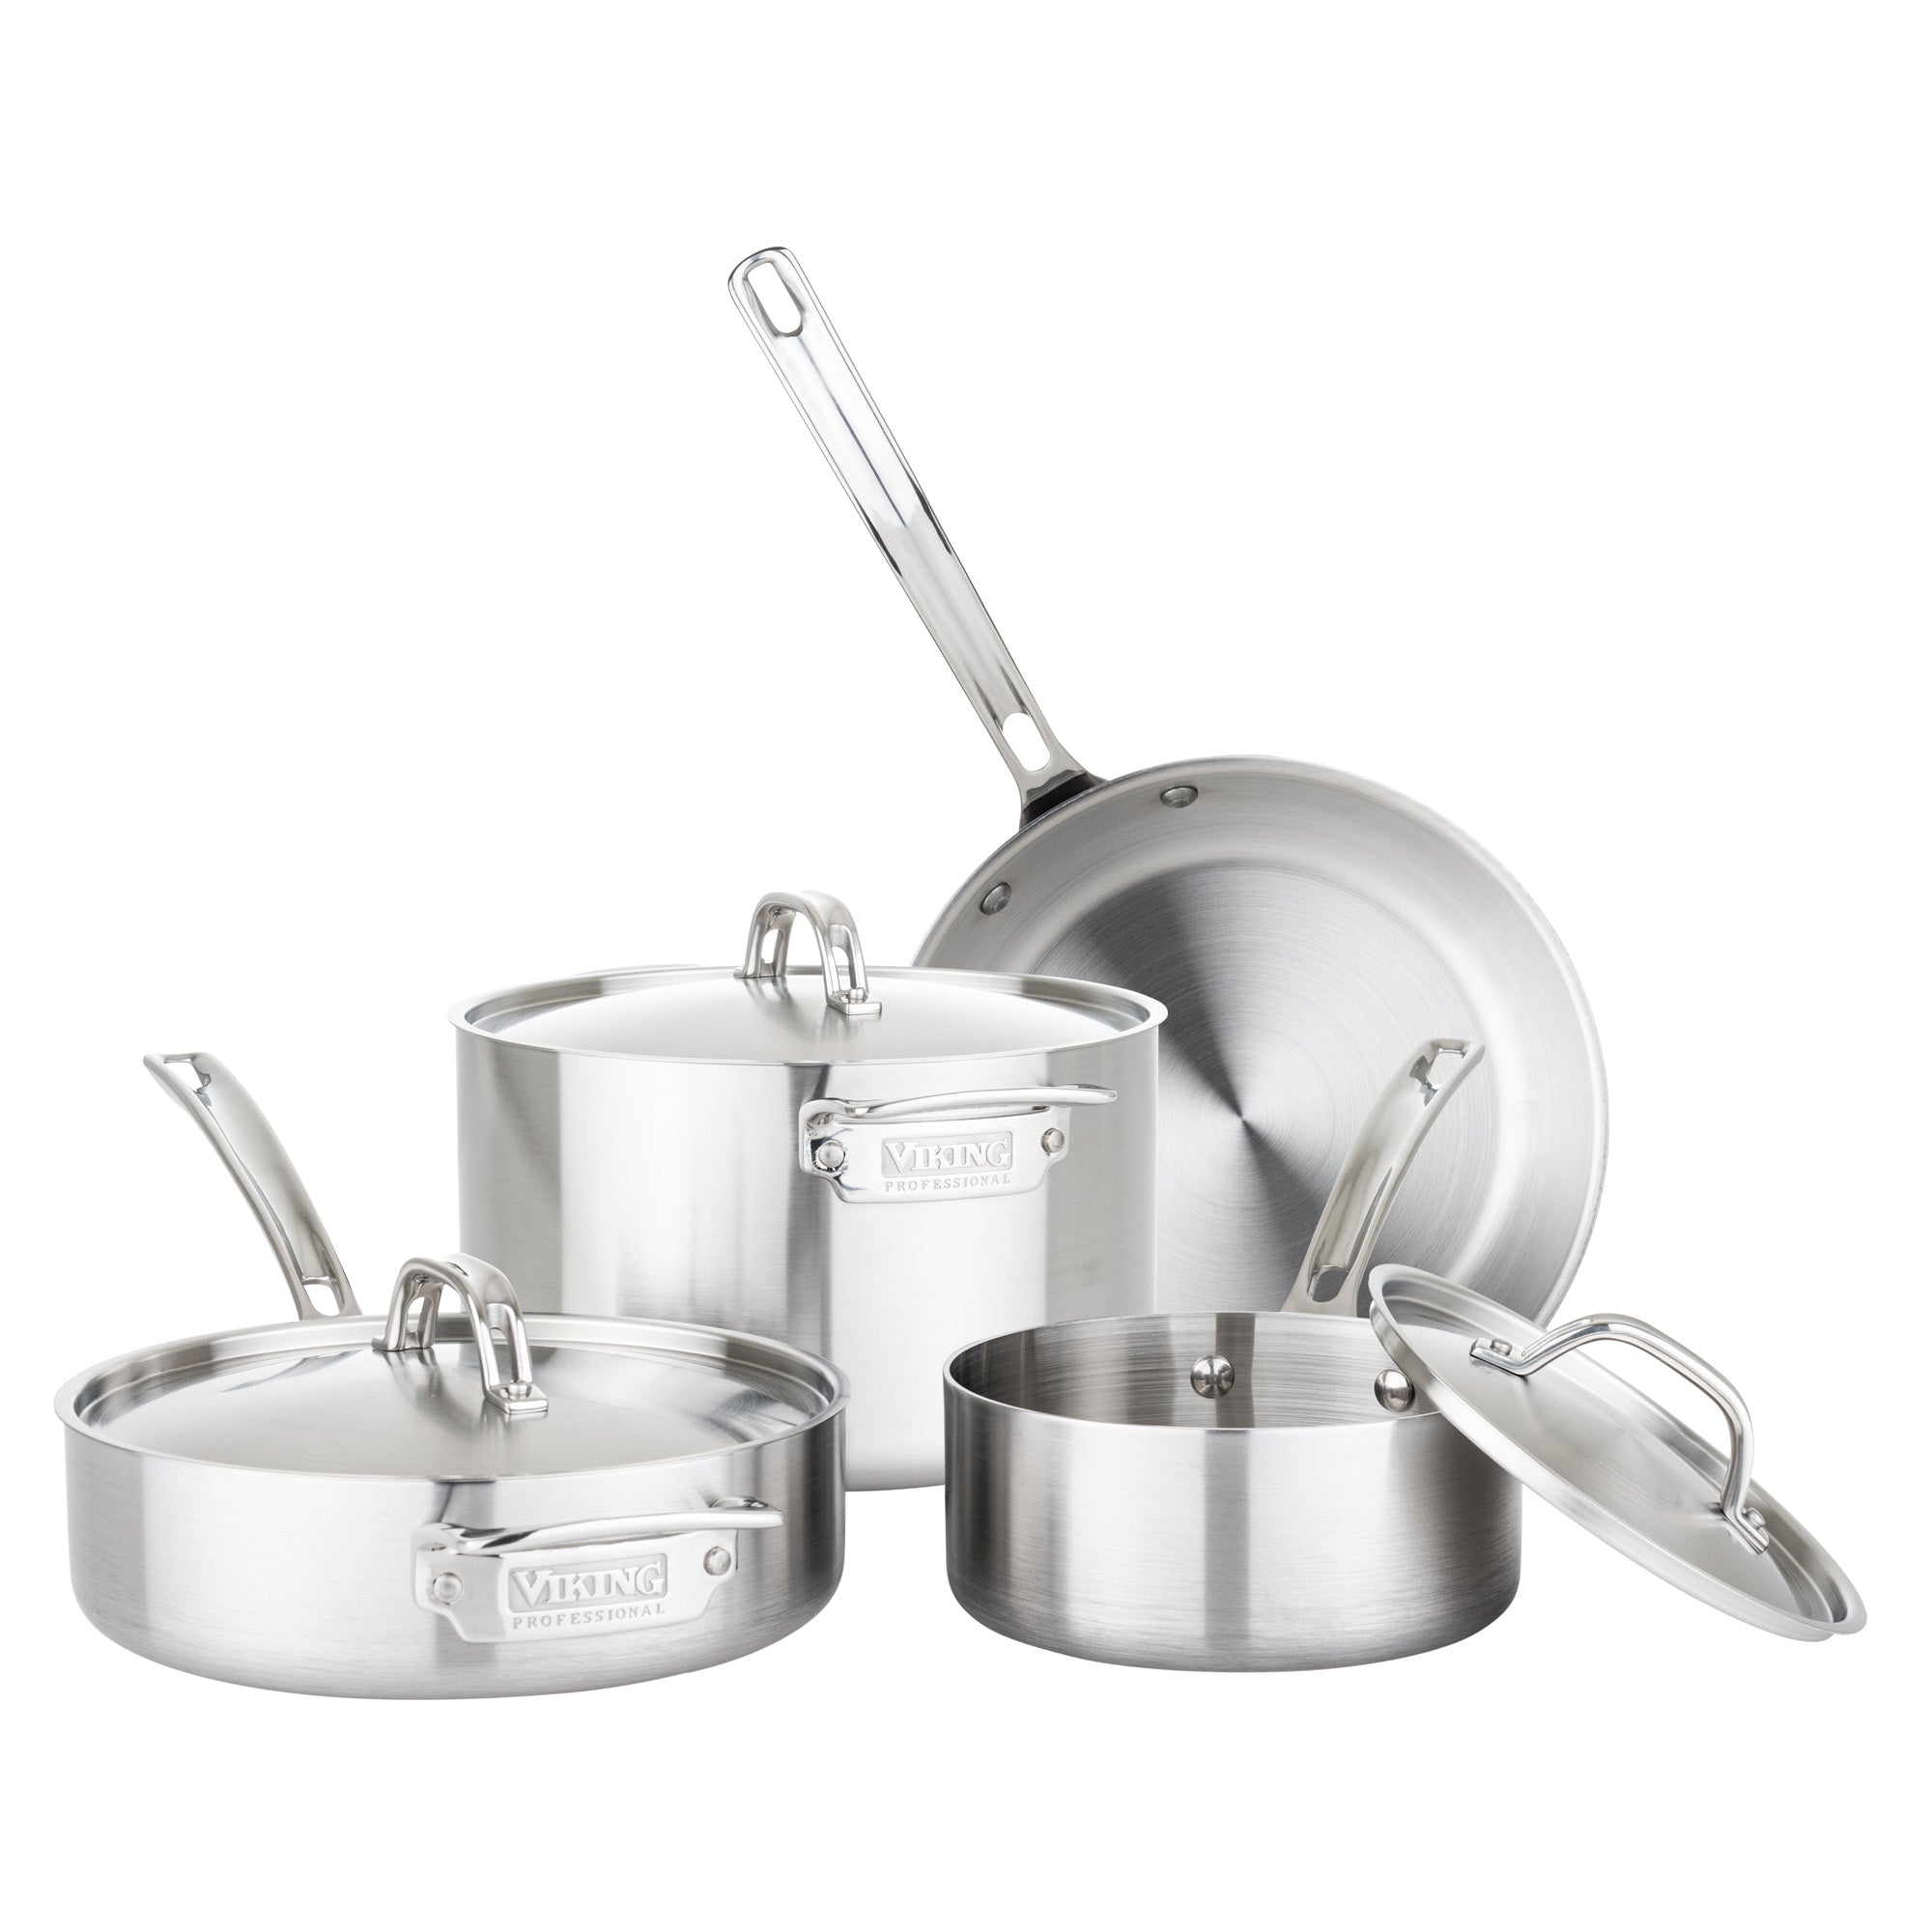 Cuisinart 5-Ply Stainless Steel Sauté Pan with Lid